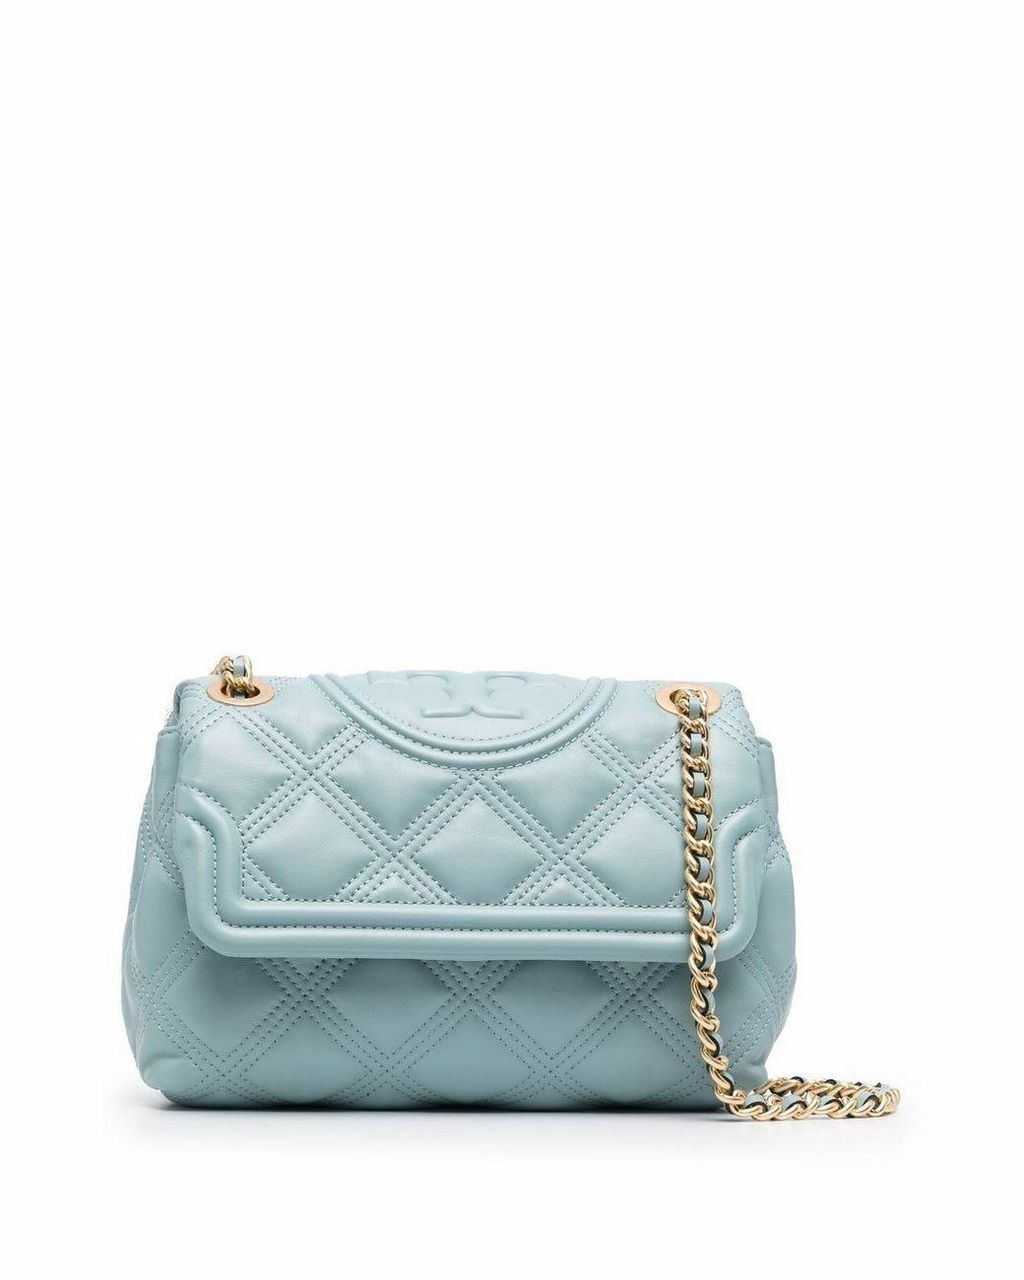 NEW Tory Burch Northern Blue Soft Fleming Small Convertible Shoulder Bag  $528